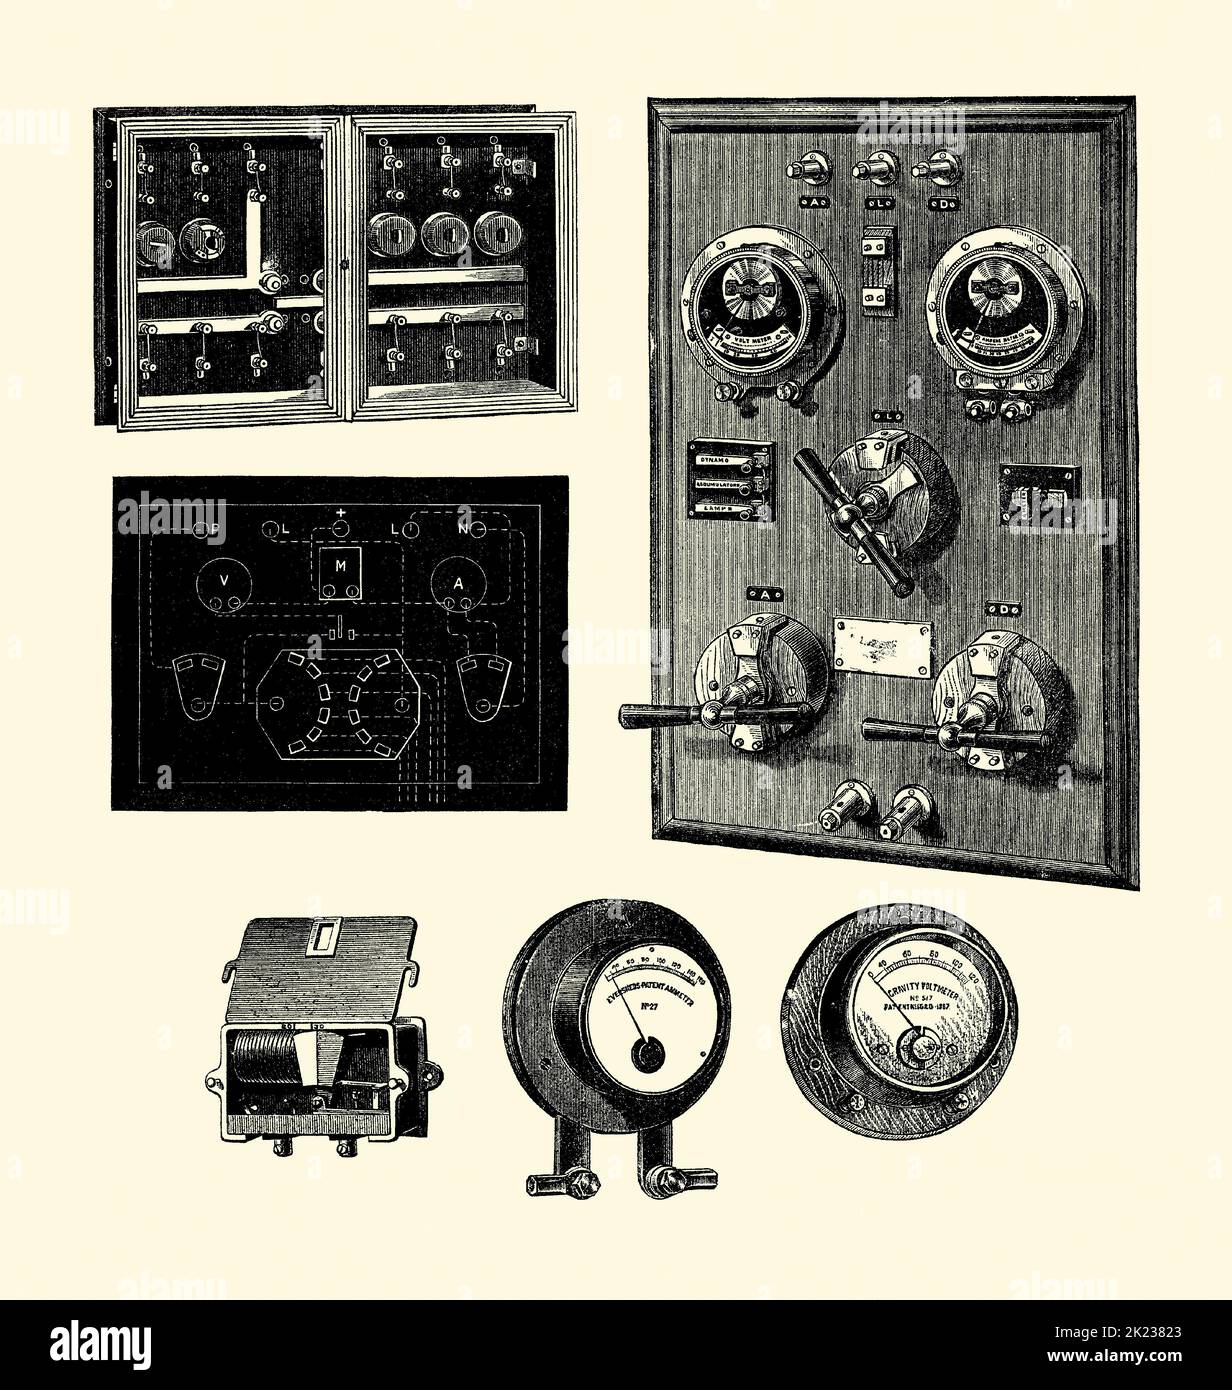 An old Victorian engraving of various electrical switchboards and meters used during that era in the UK. It is from a book of 1890. Top left is a ‘corridor branch’ switchboard. Below a plan of a universal switchboard. Top right is a ‘main’ switchboard. Bottom left is a magnetic cut-out, centre a gravity ammeter, right a gravity voltmeter – old 1800s graphics. Stock Photo